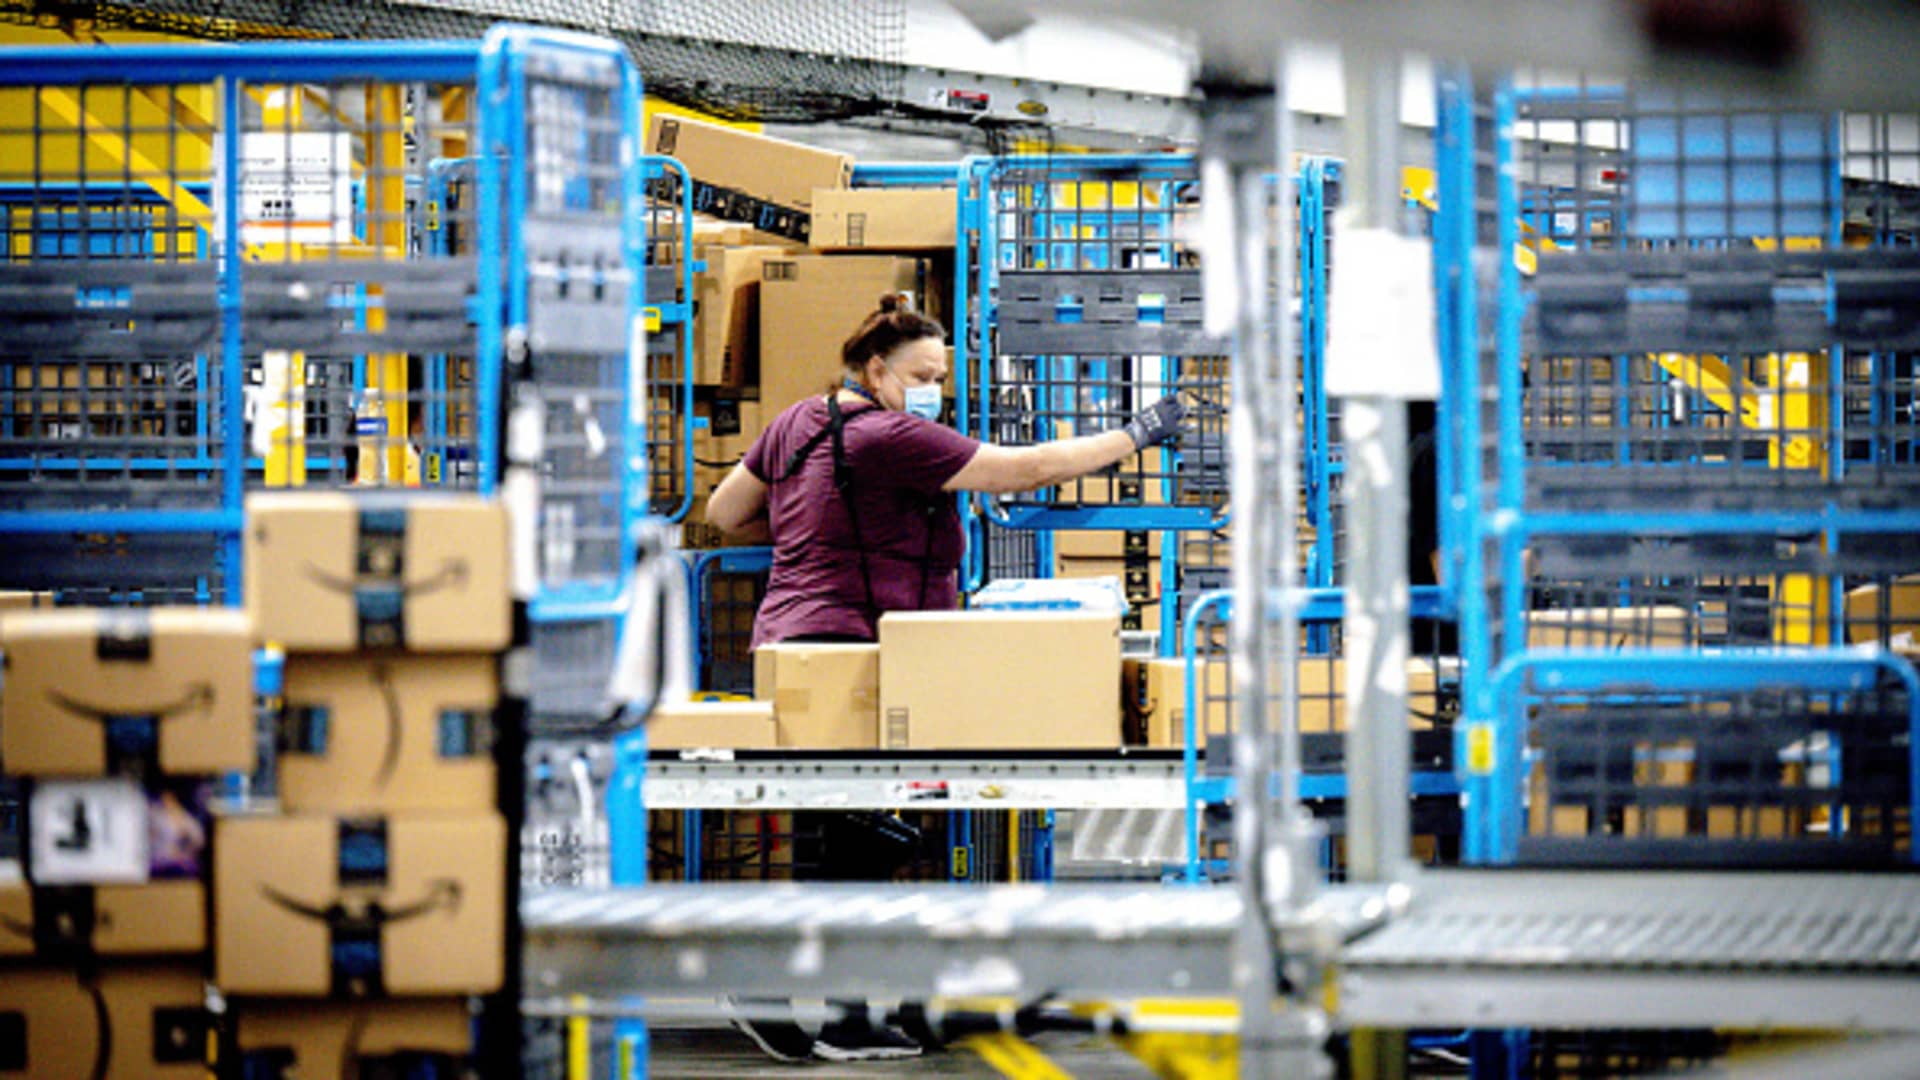 California alleges Amazon inflated prices with supplier deals